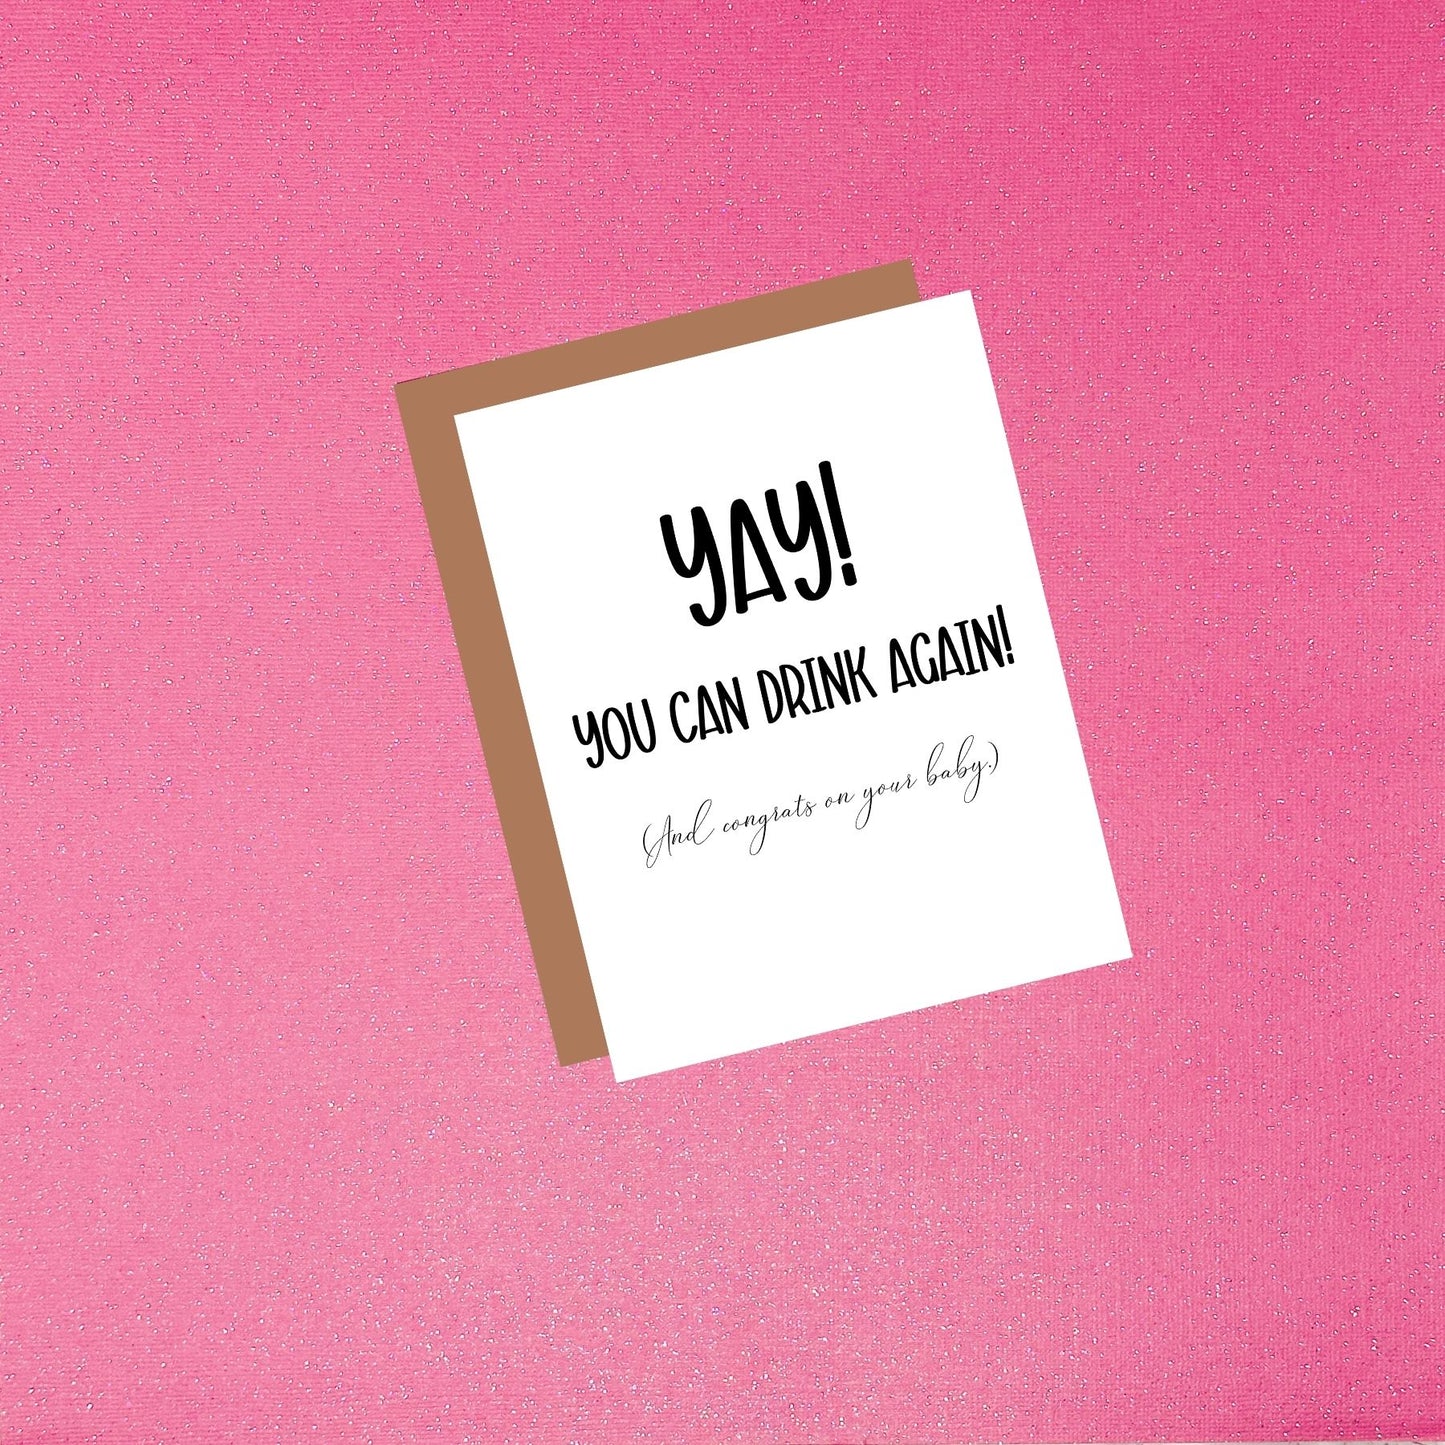 Yay You Can Drink Again (And Congrats On Your Baby) - Baby Shower Card